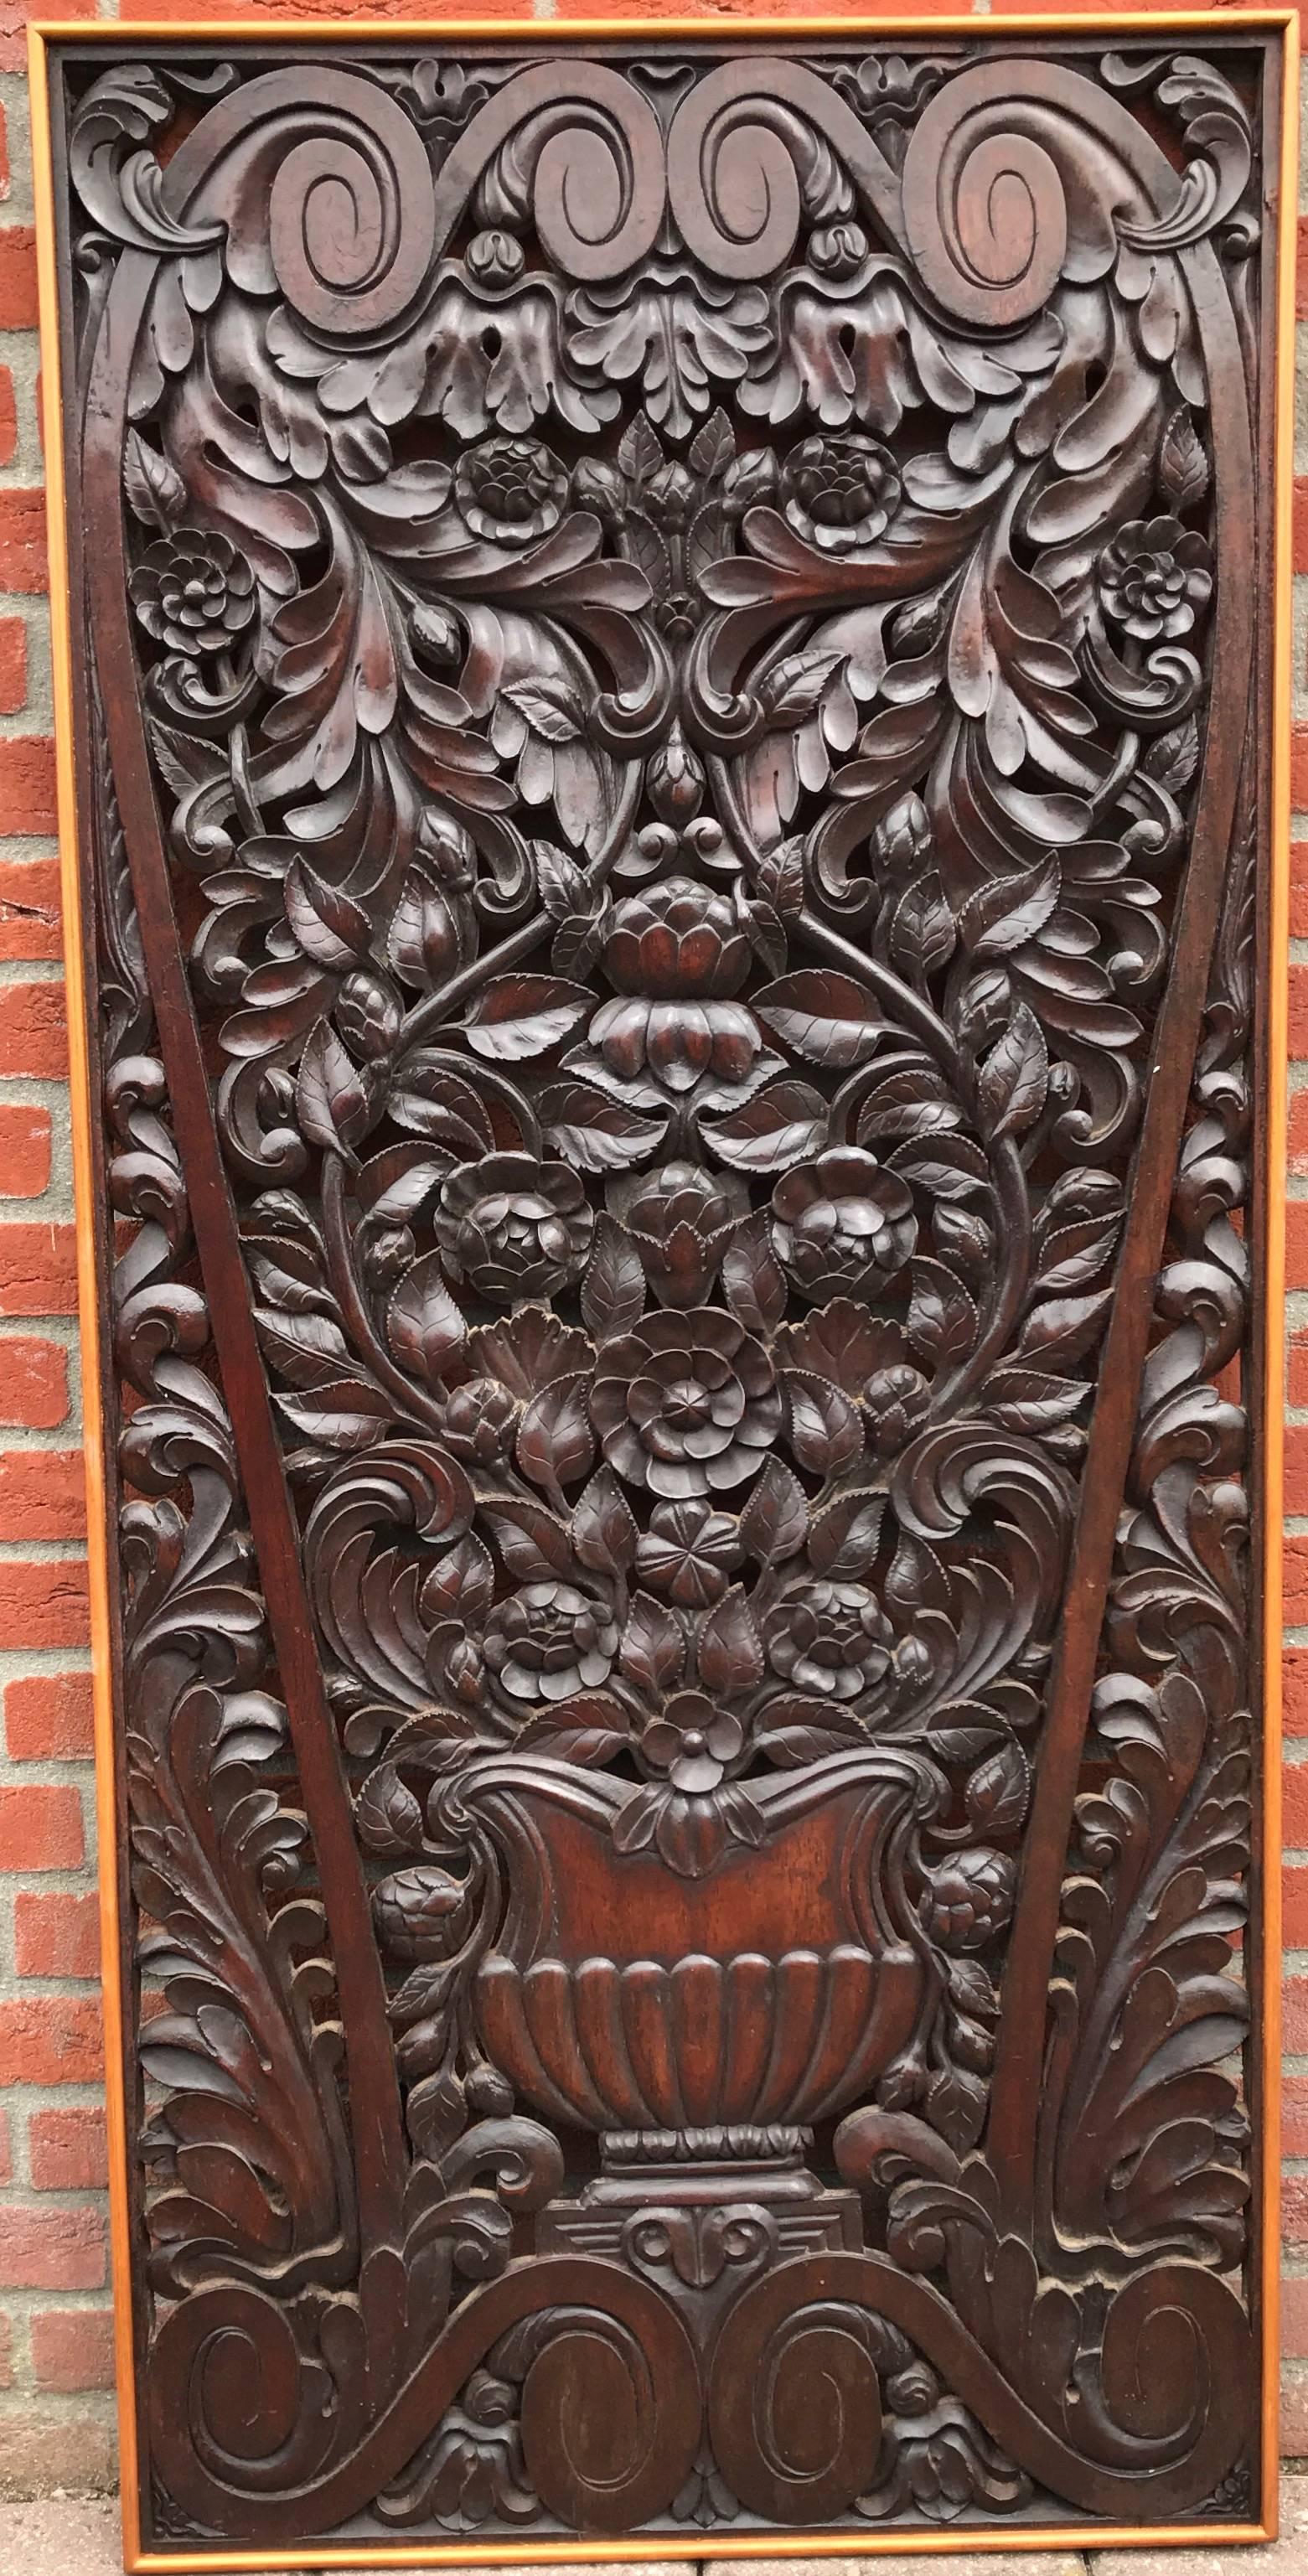 Impressive, large and highly decorative wall panel.

Most people would not be able to draw a picture like this, but the craftsman who made this astonishing panel is not 'most people'. The size, the shape, the quality and the look and feel of this